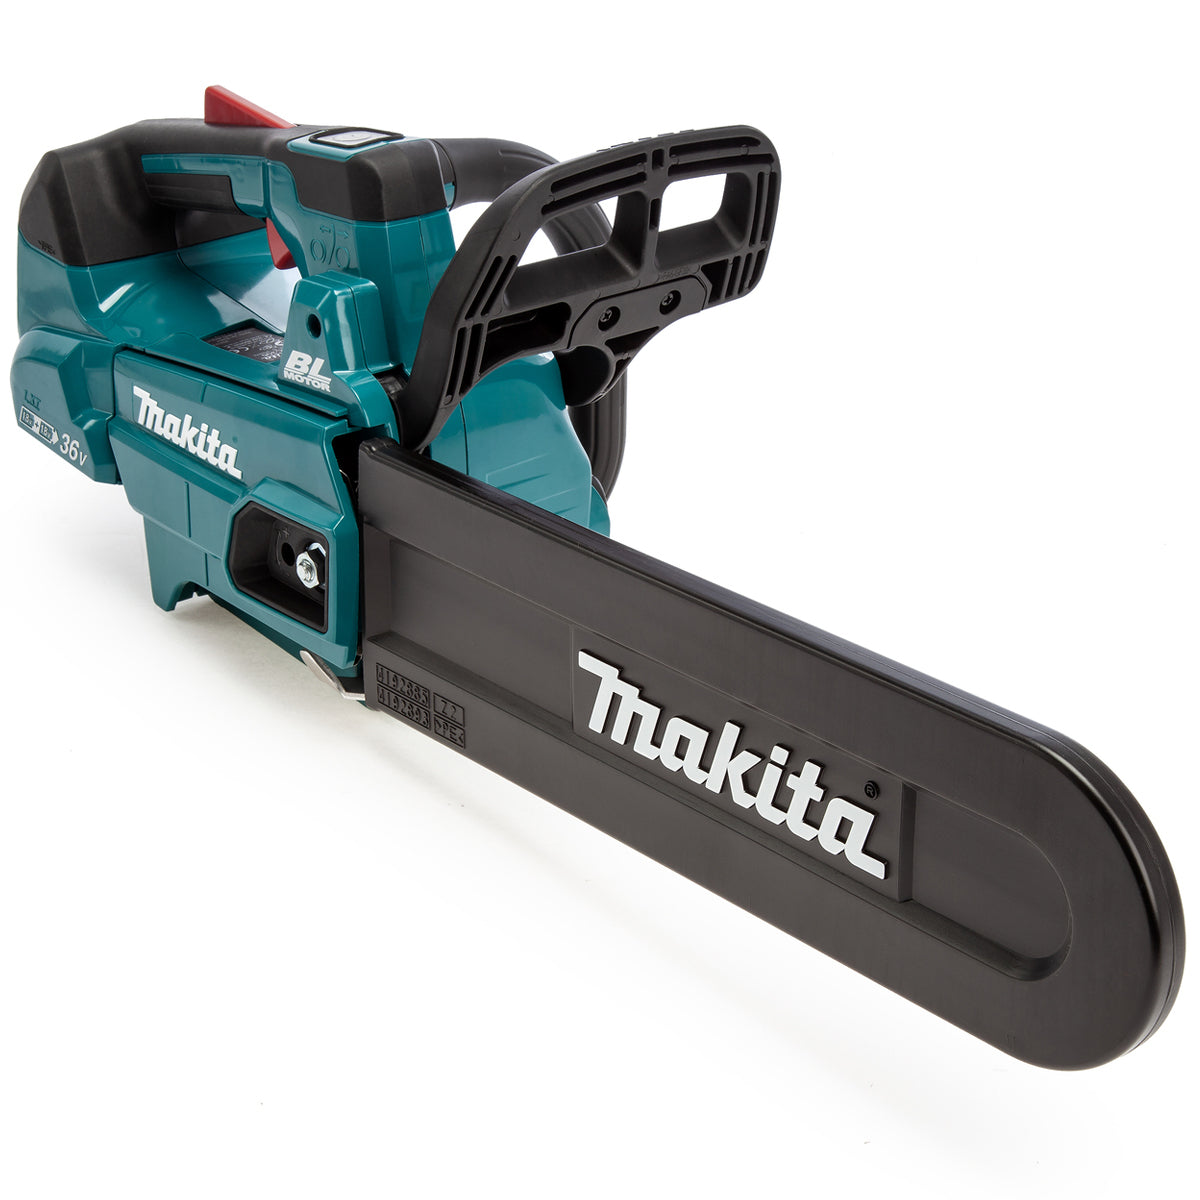 Makita DUC306Z 36V LXT Brushless Top Handle Chainsaw Body Only